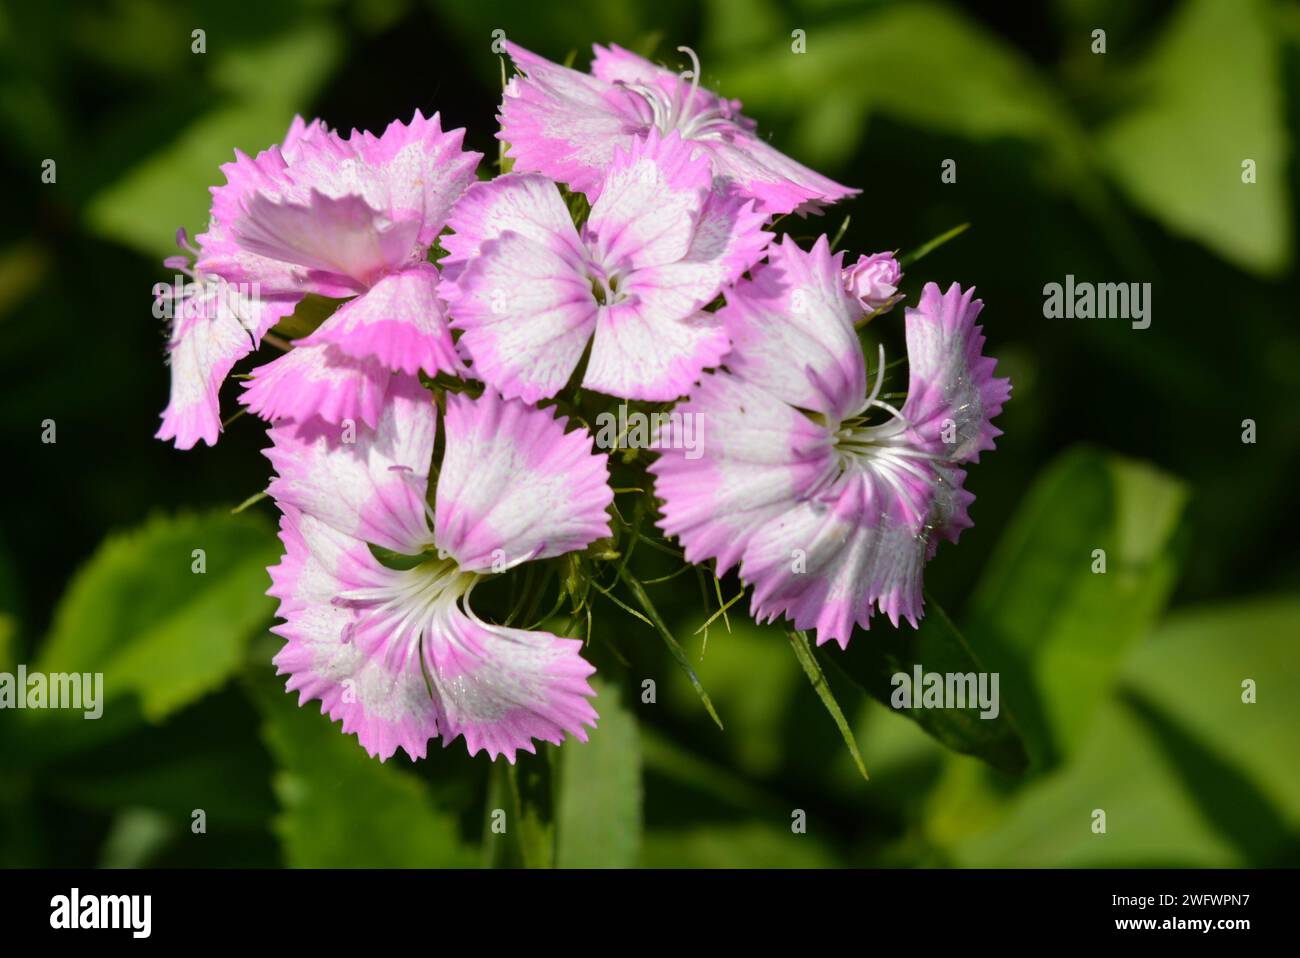 Nature, beautiful and bright purple white flowers growing in home garden. Flowering phlox bushes, Ancient Greek,  phloxes,  phlges. Stock Photo